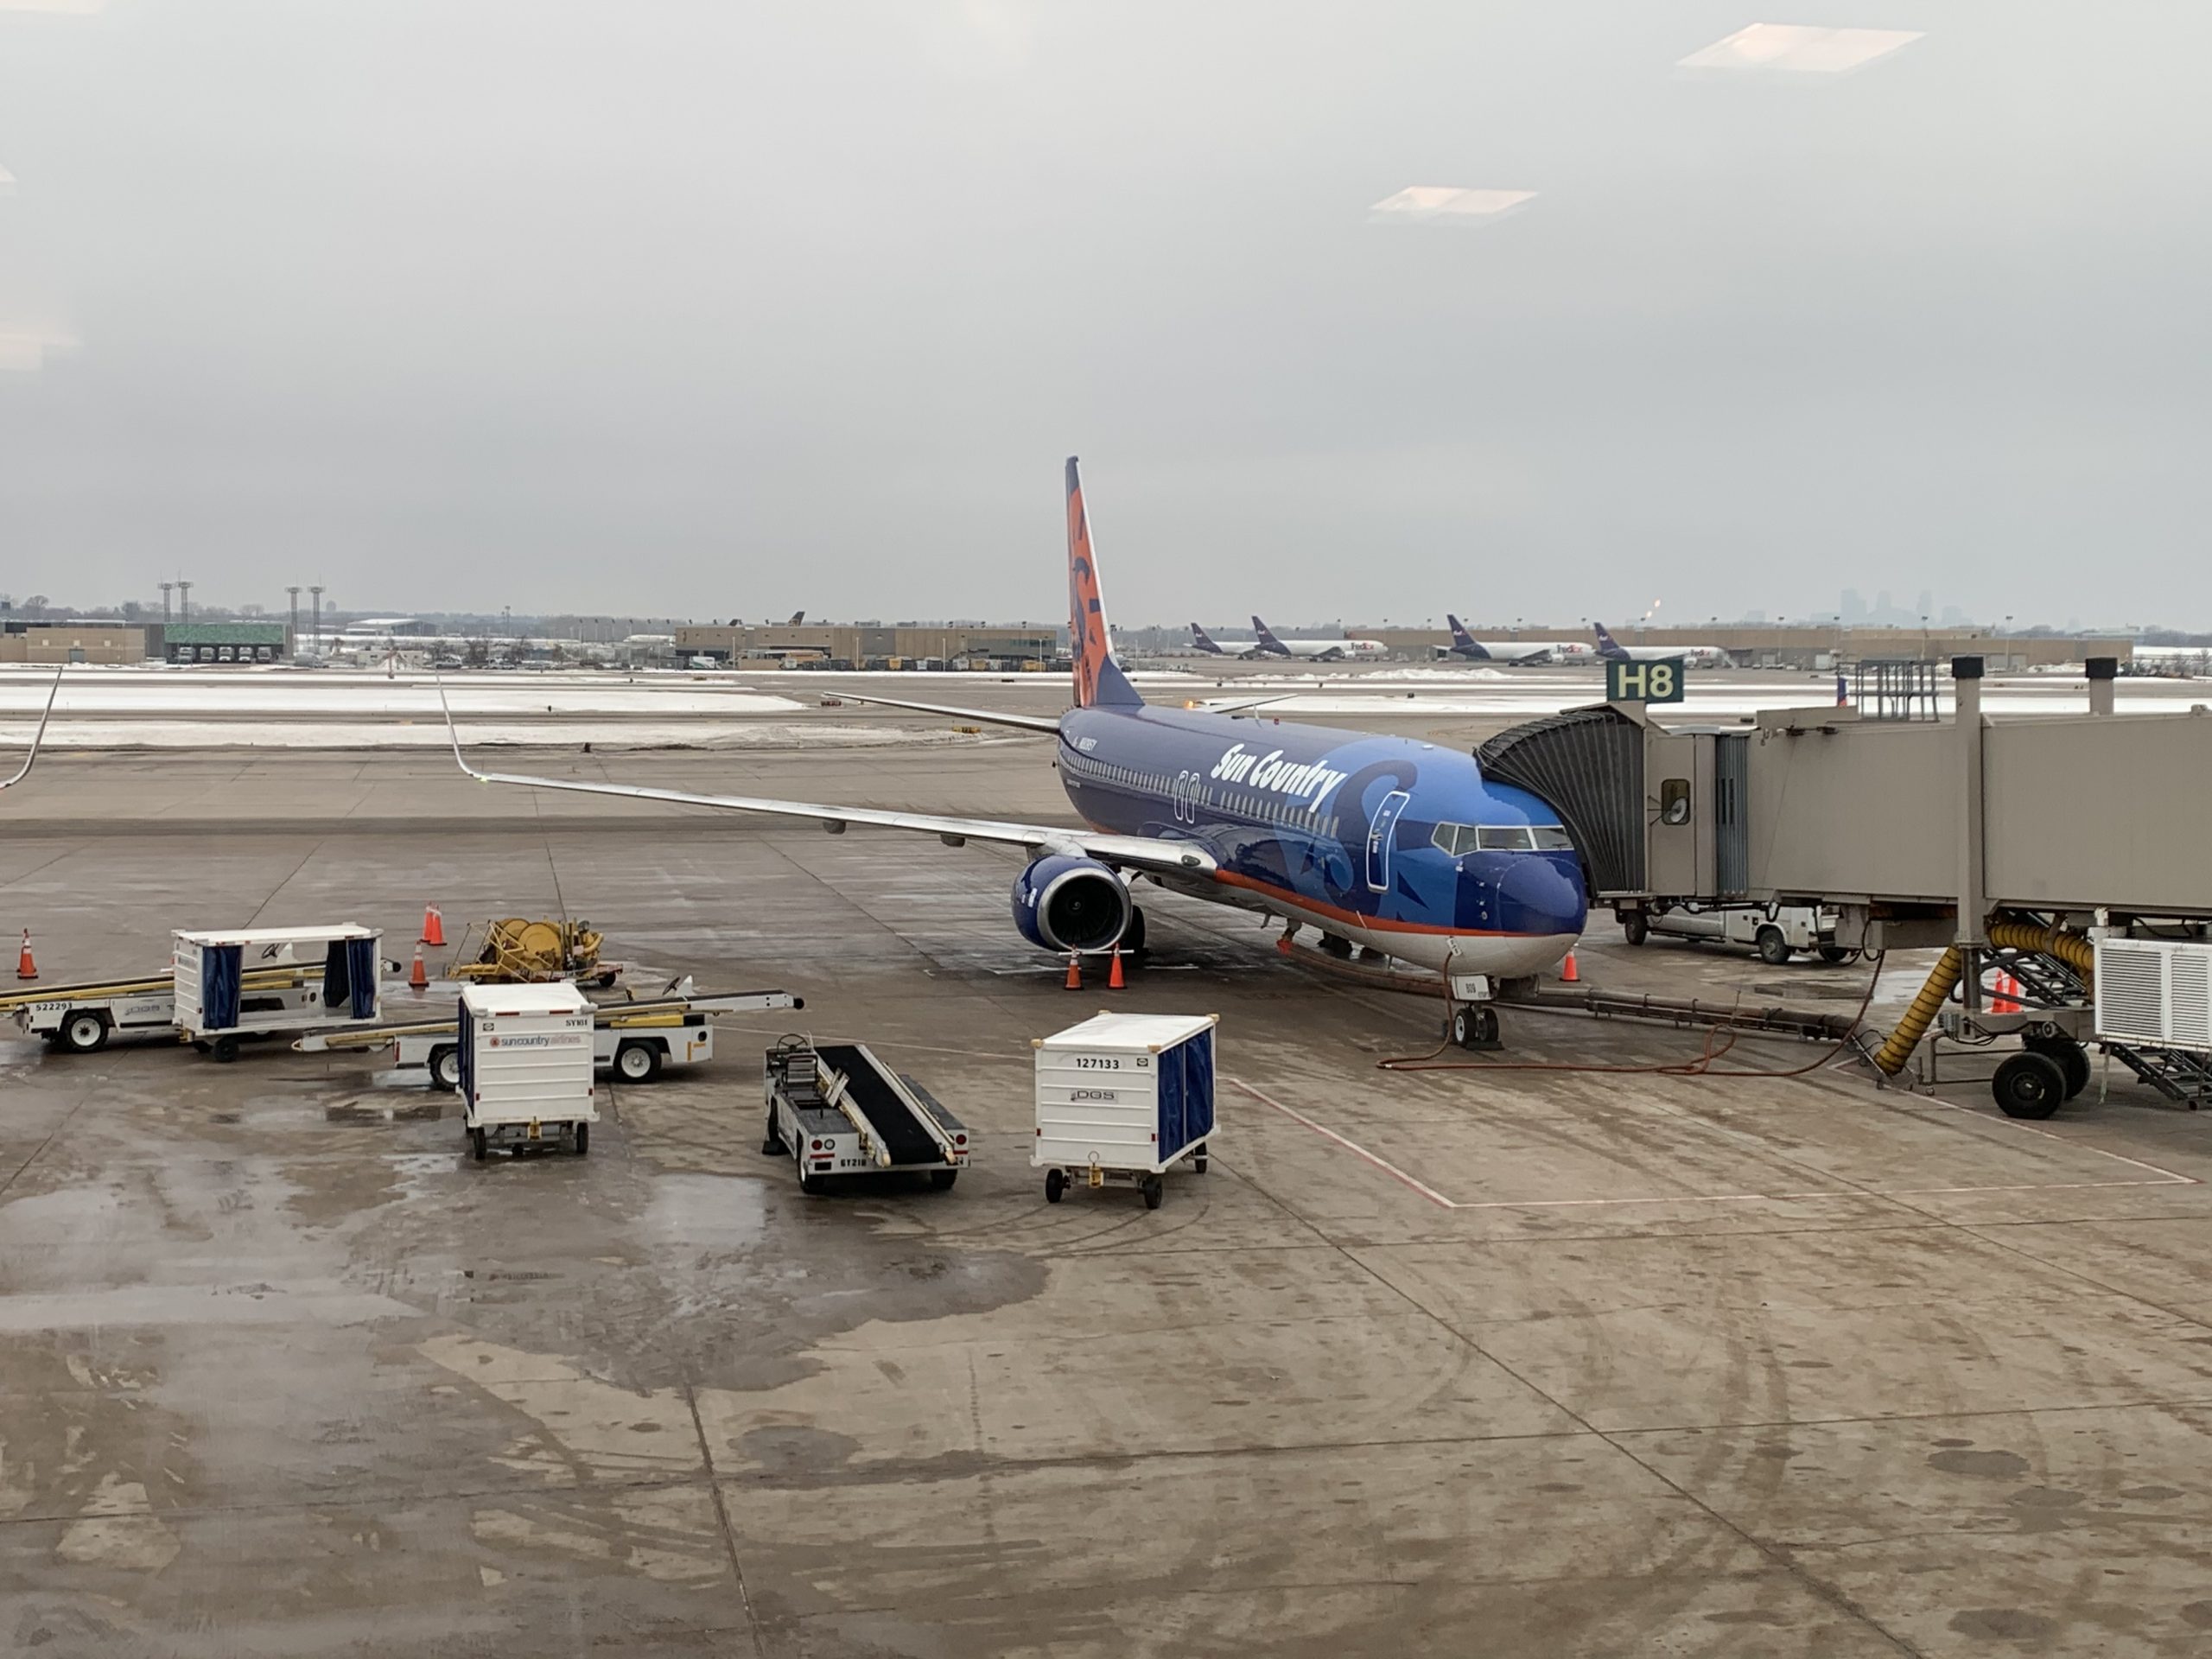 Sun Country Airlines Review. Plane waiting at gate for passengers to board.